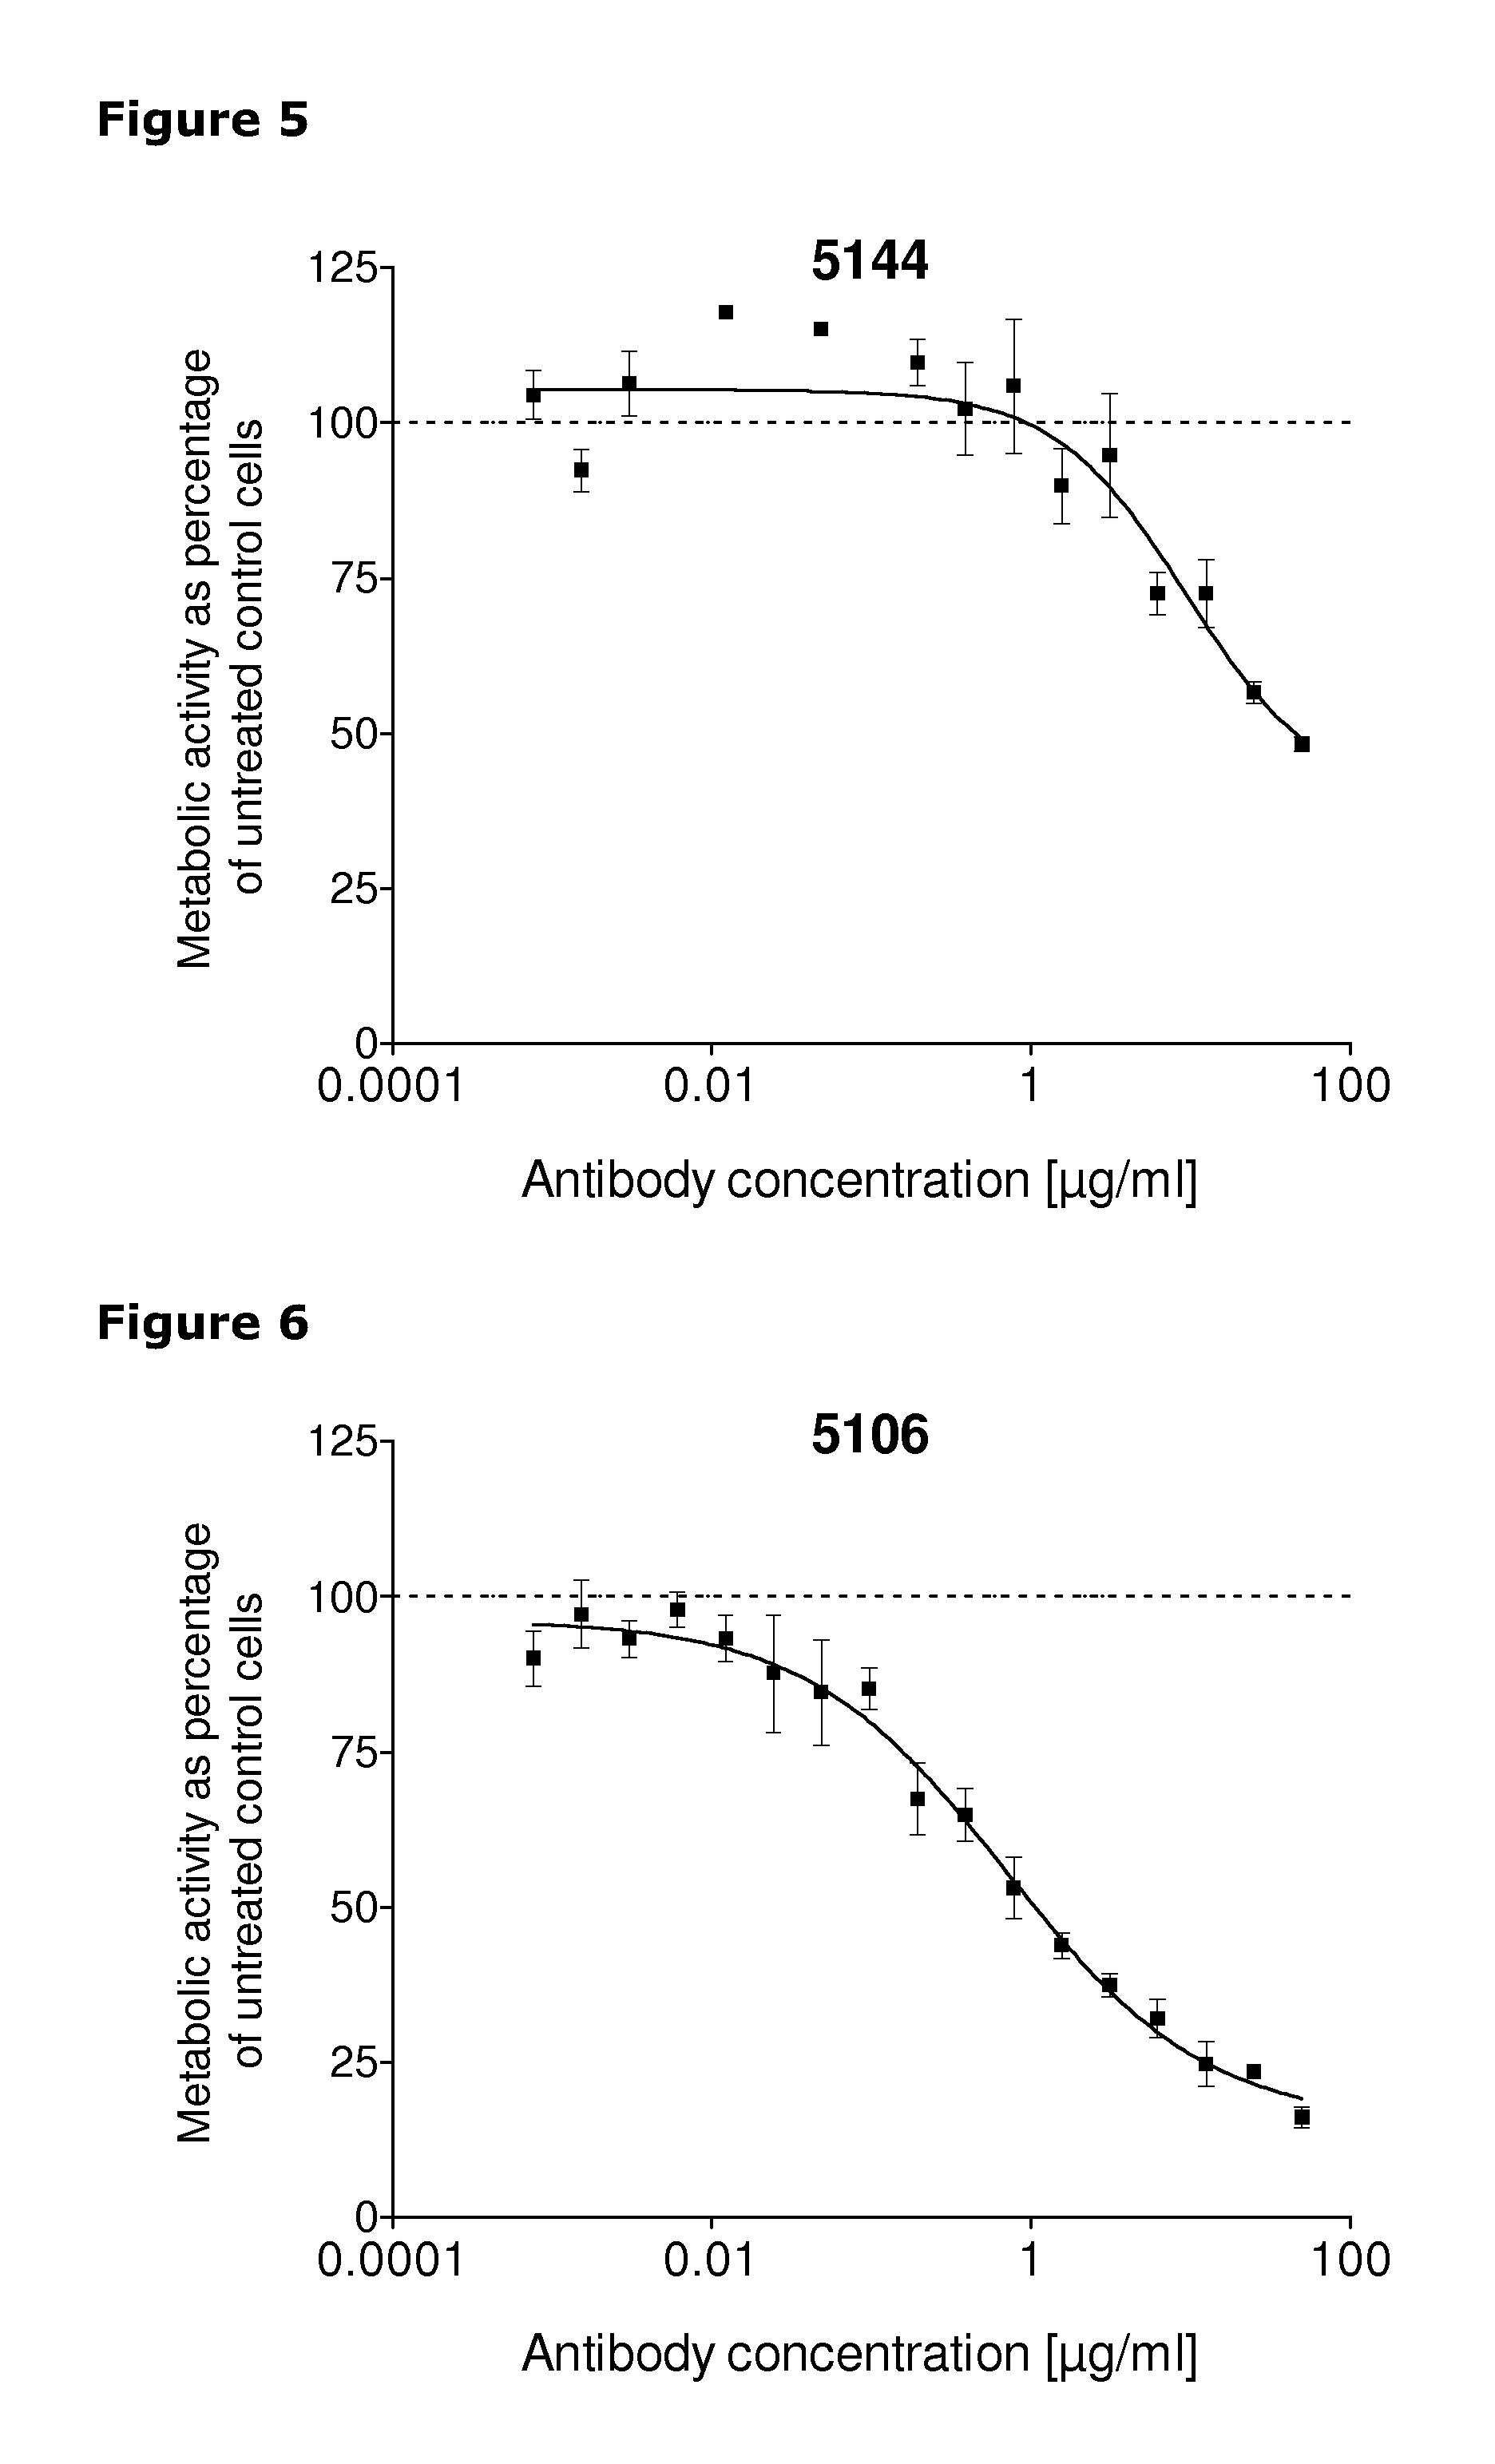 Anti-HER3 antibodies and compositions